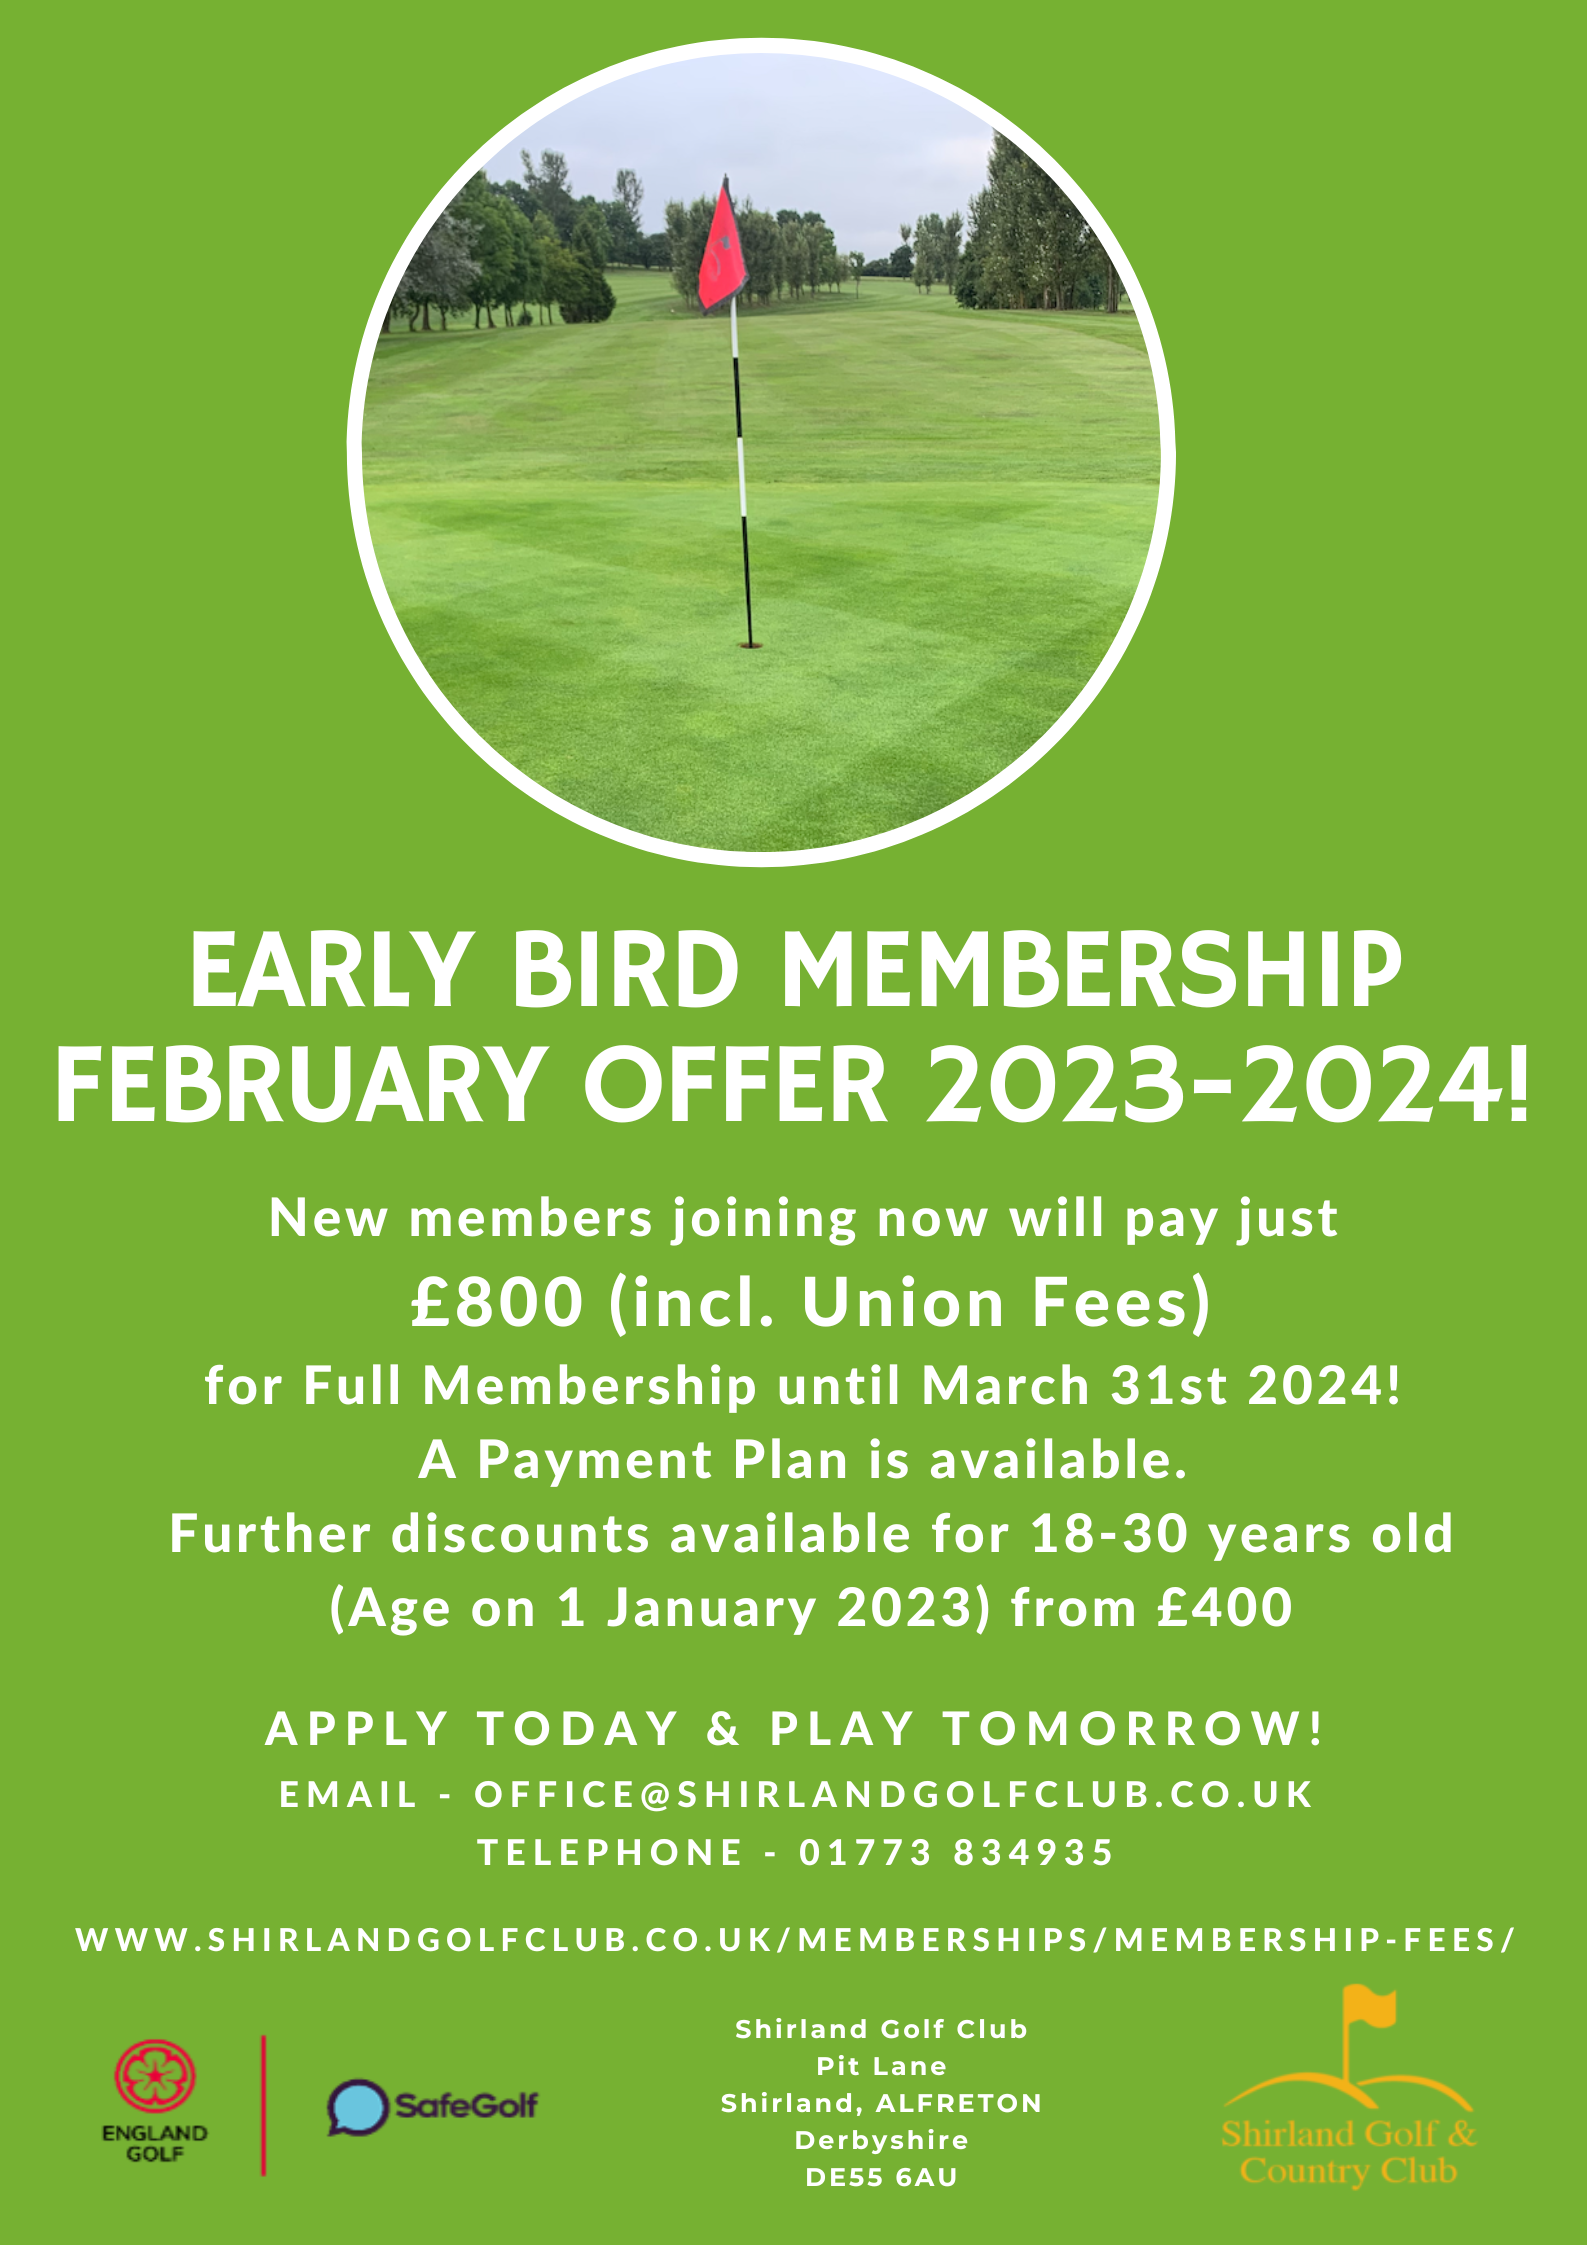 Shirland Golf Club is offering an early bird membership offer throughout February